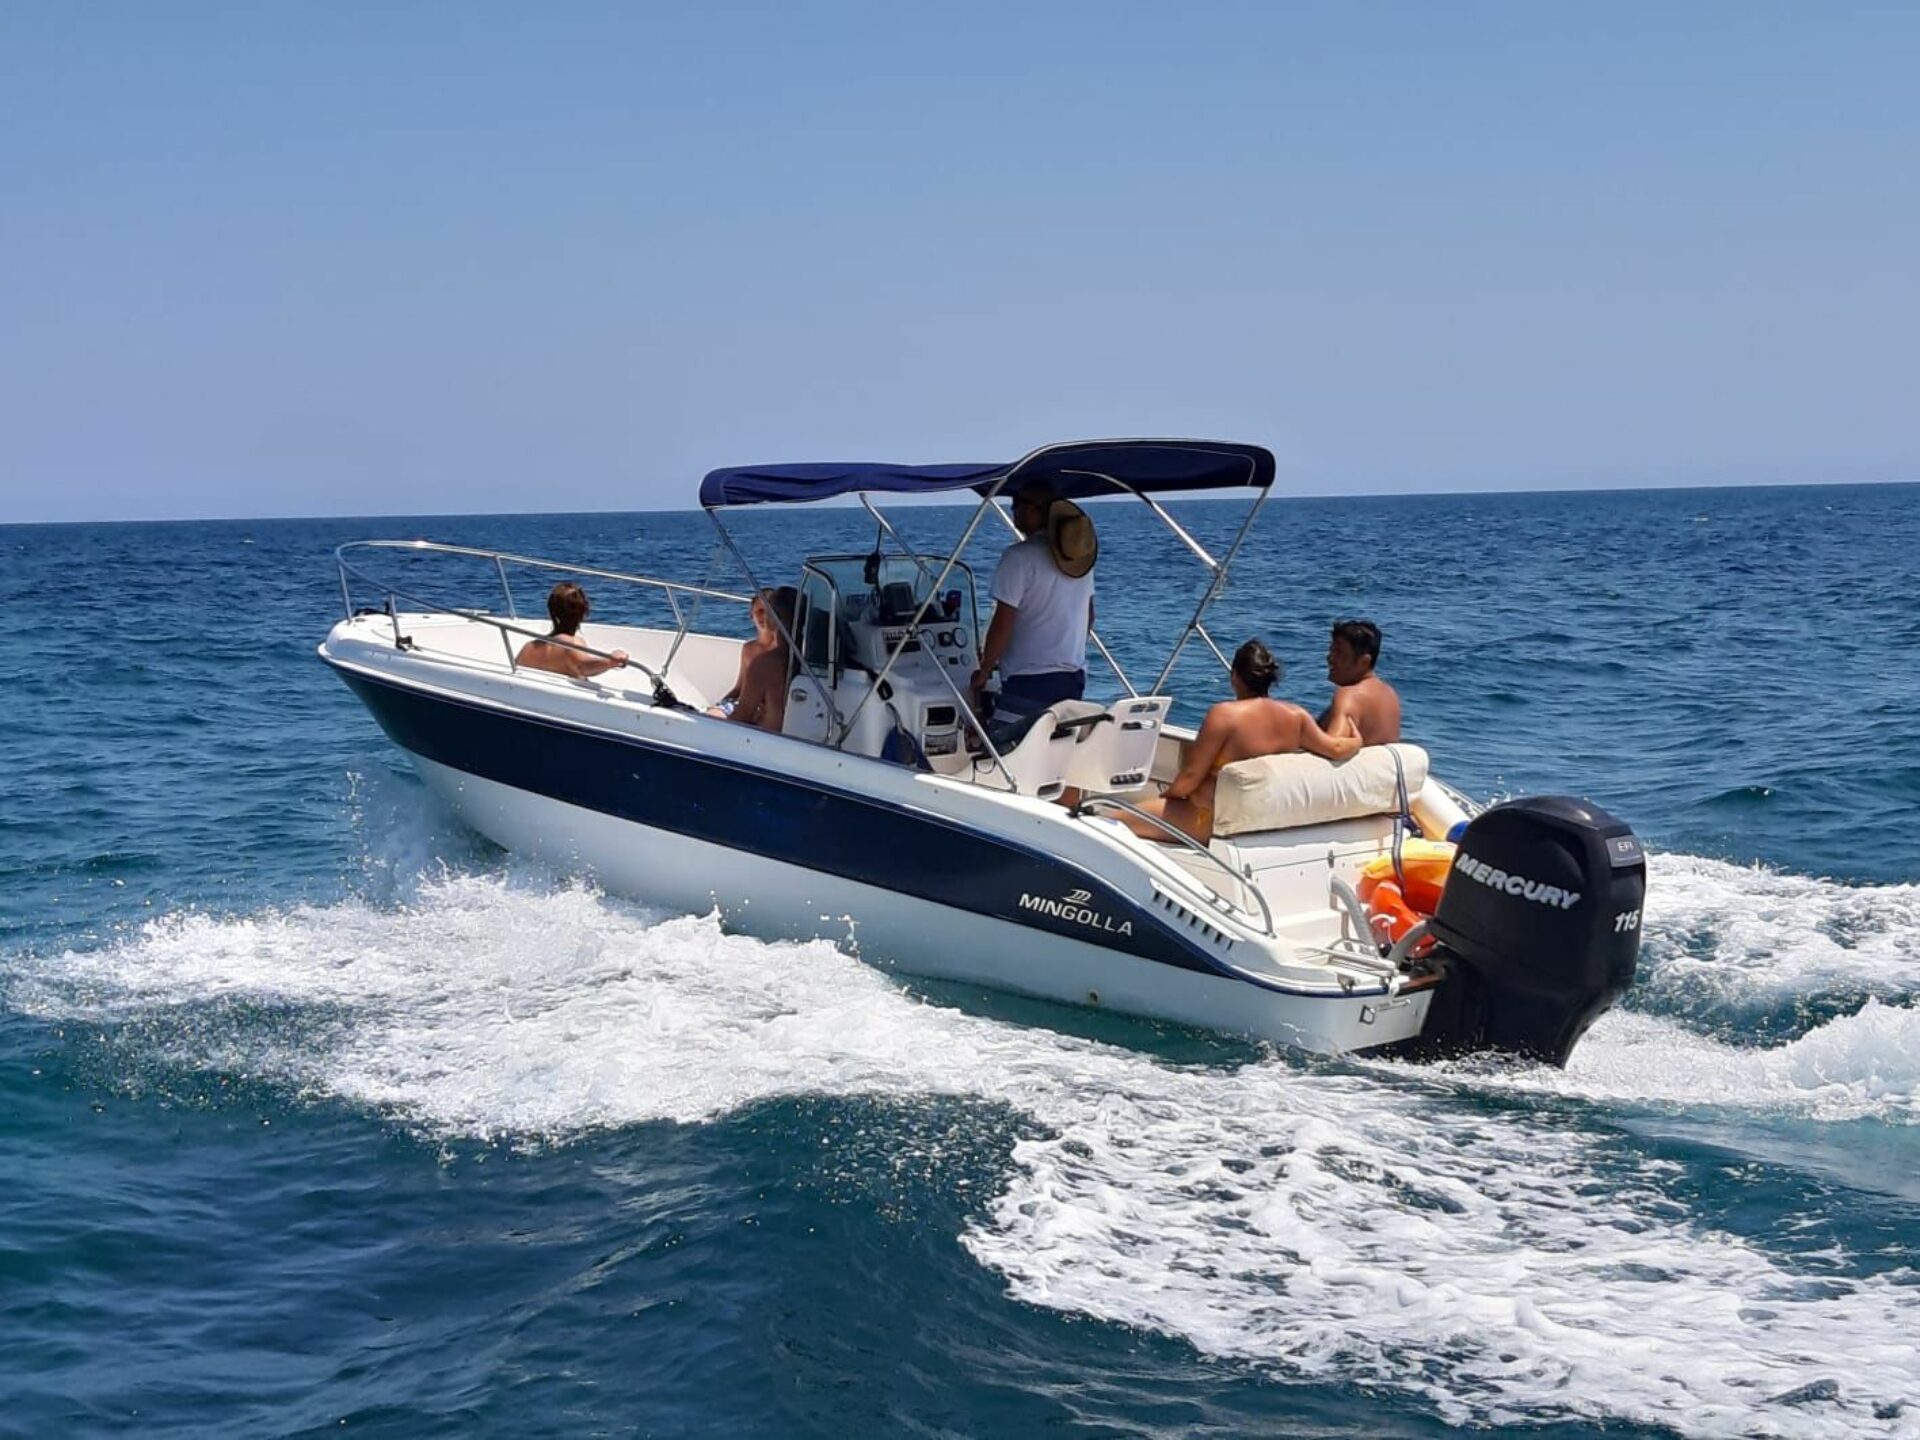 Boat Tours Torre dell’orso